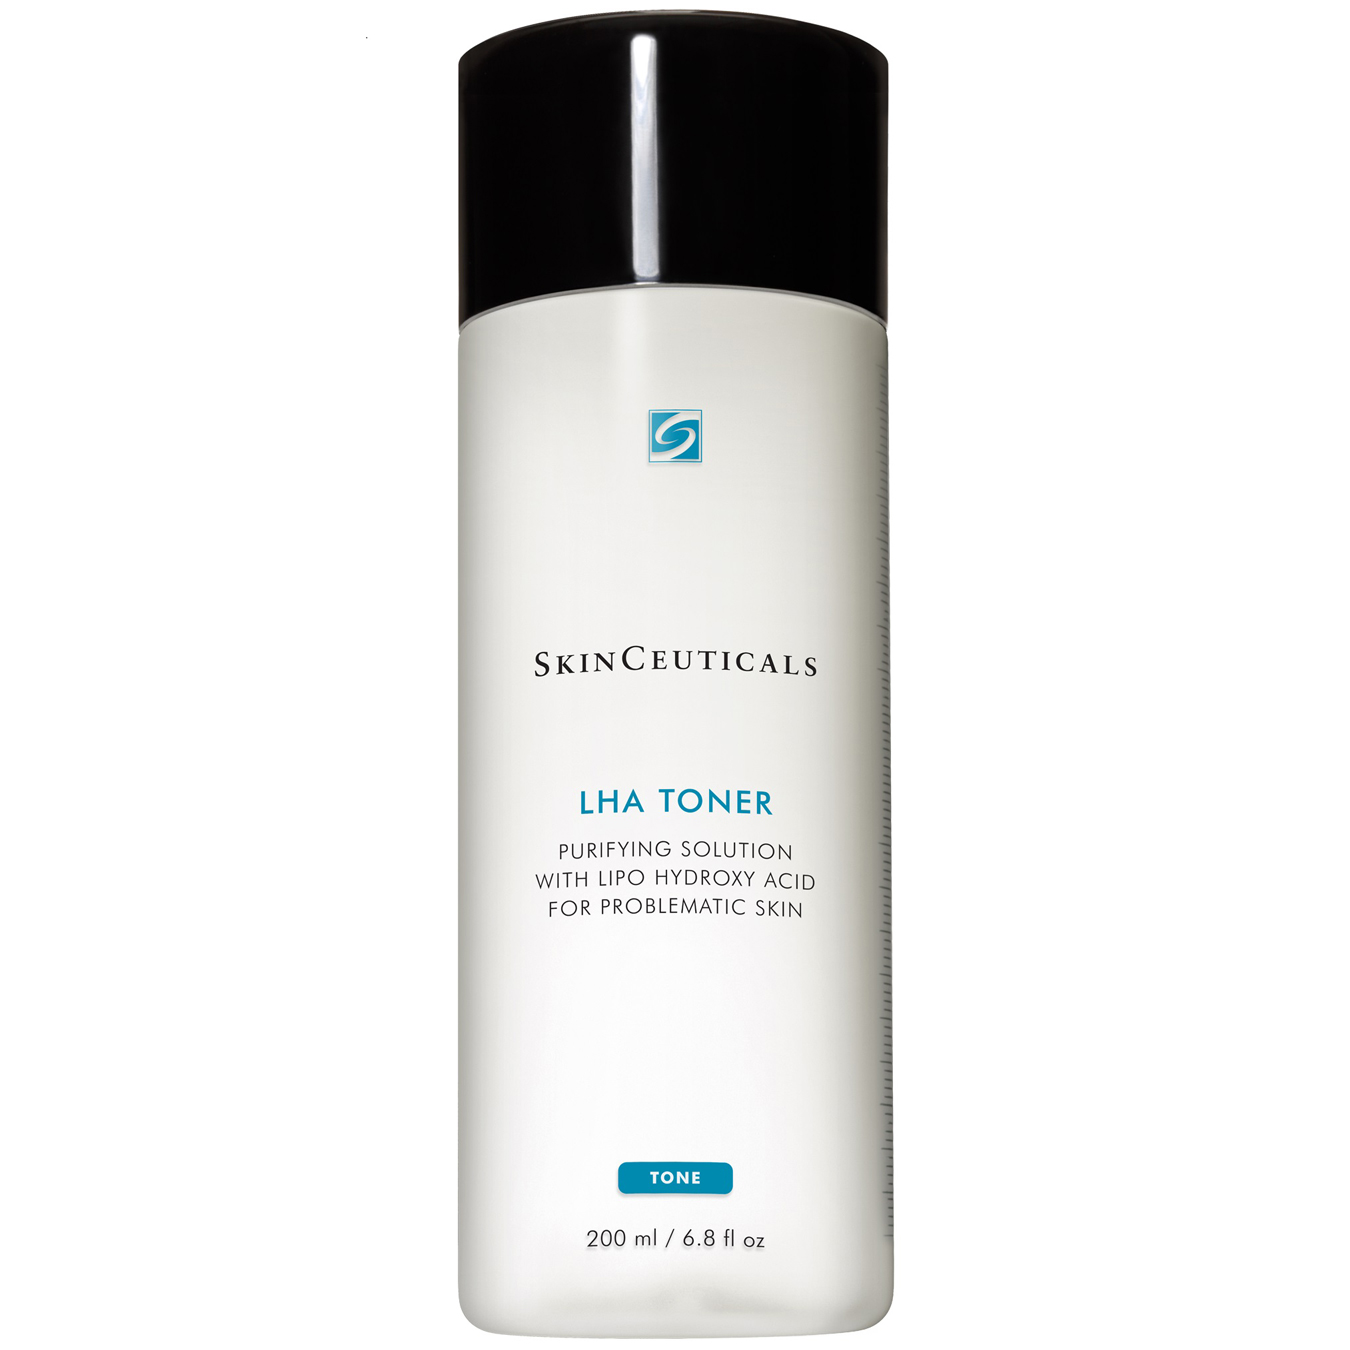 Priming toner with Biomedic LHA technology for oily or problematic skin